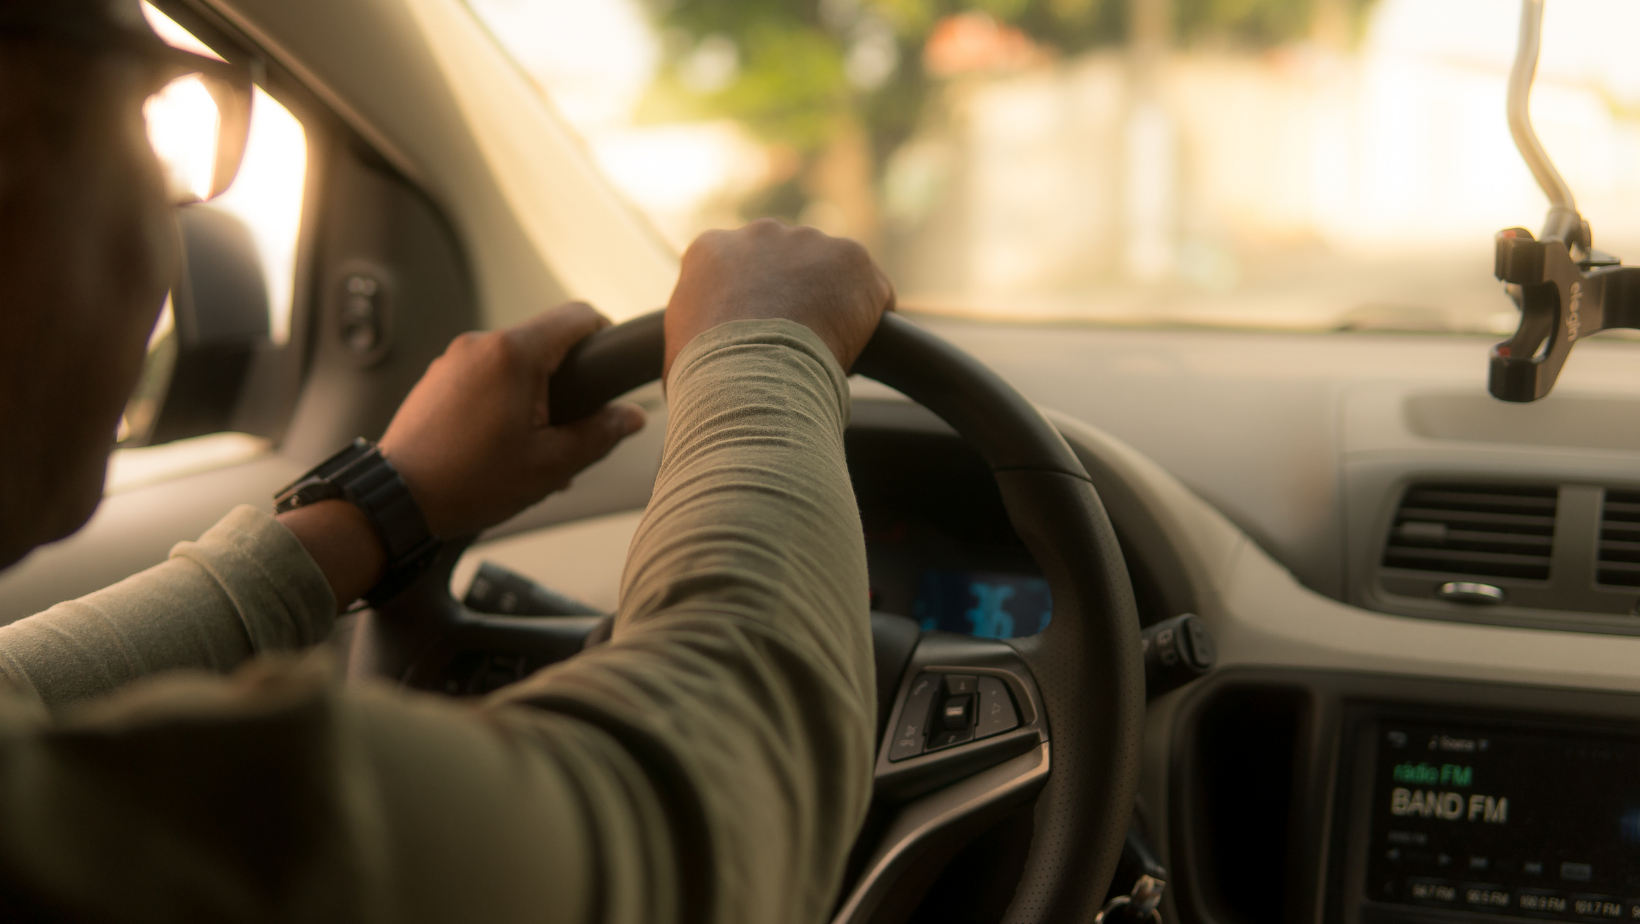 An In-Depth Look at How Telematics Impacts Your Auto Insurance Policy